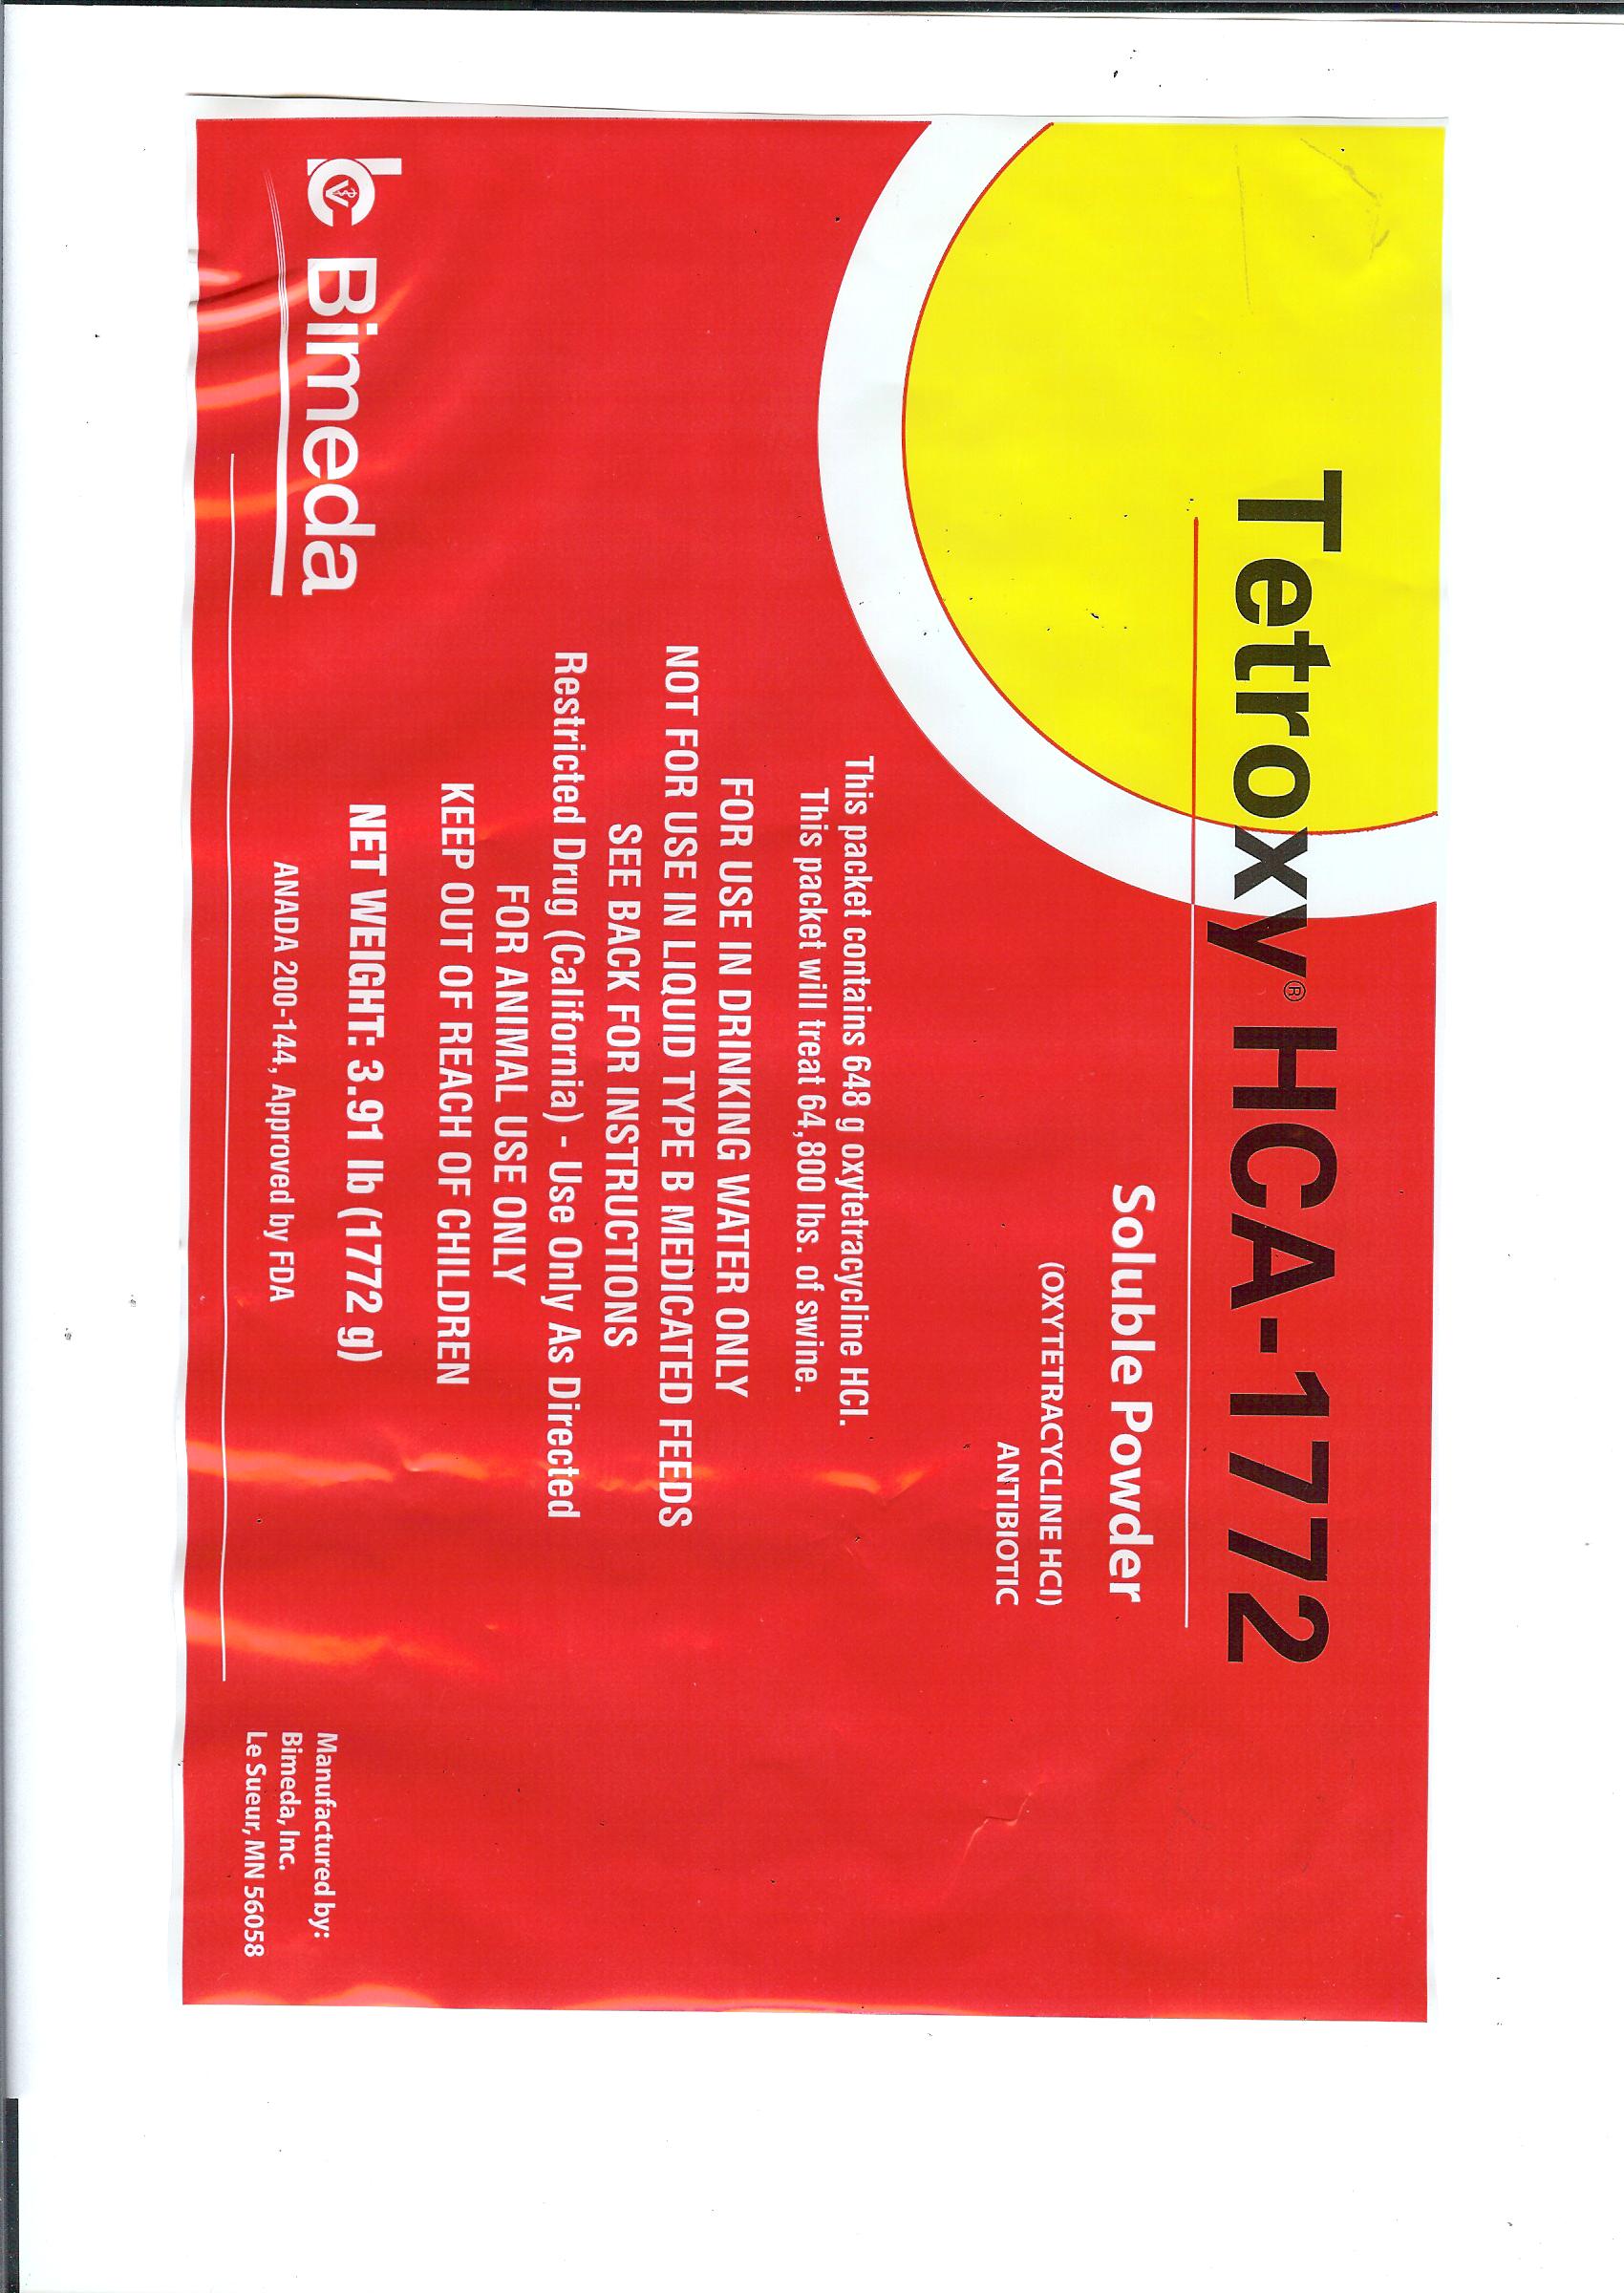 oxytetracycline hcl soluble powder dosage for chickens